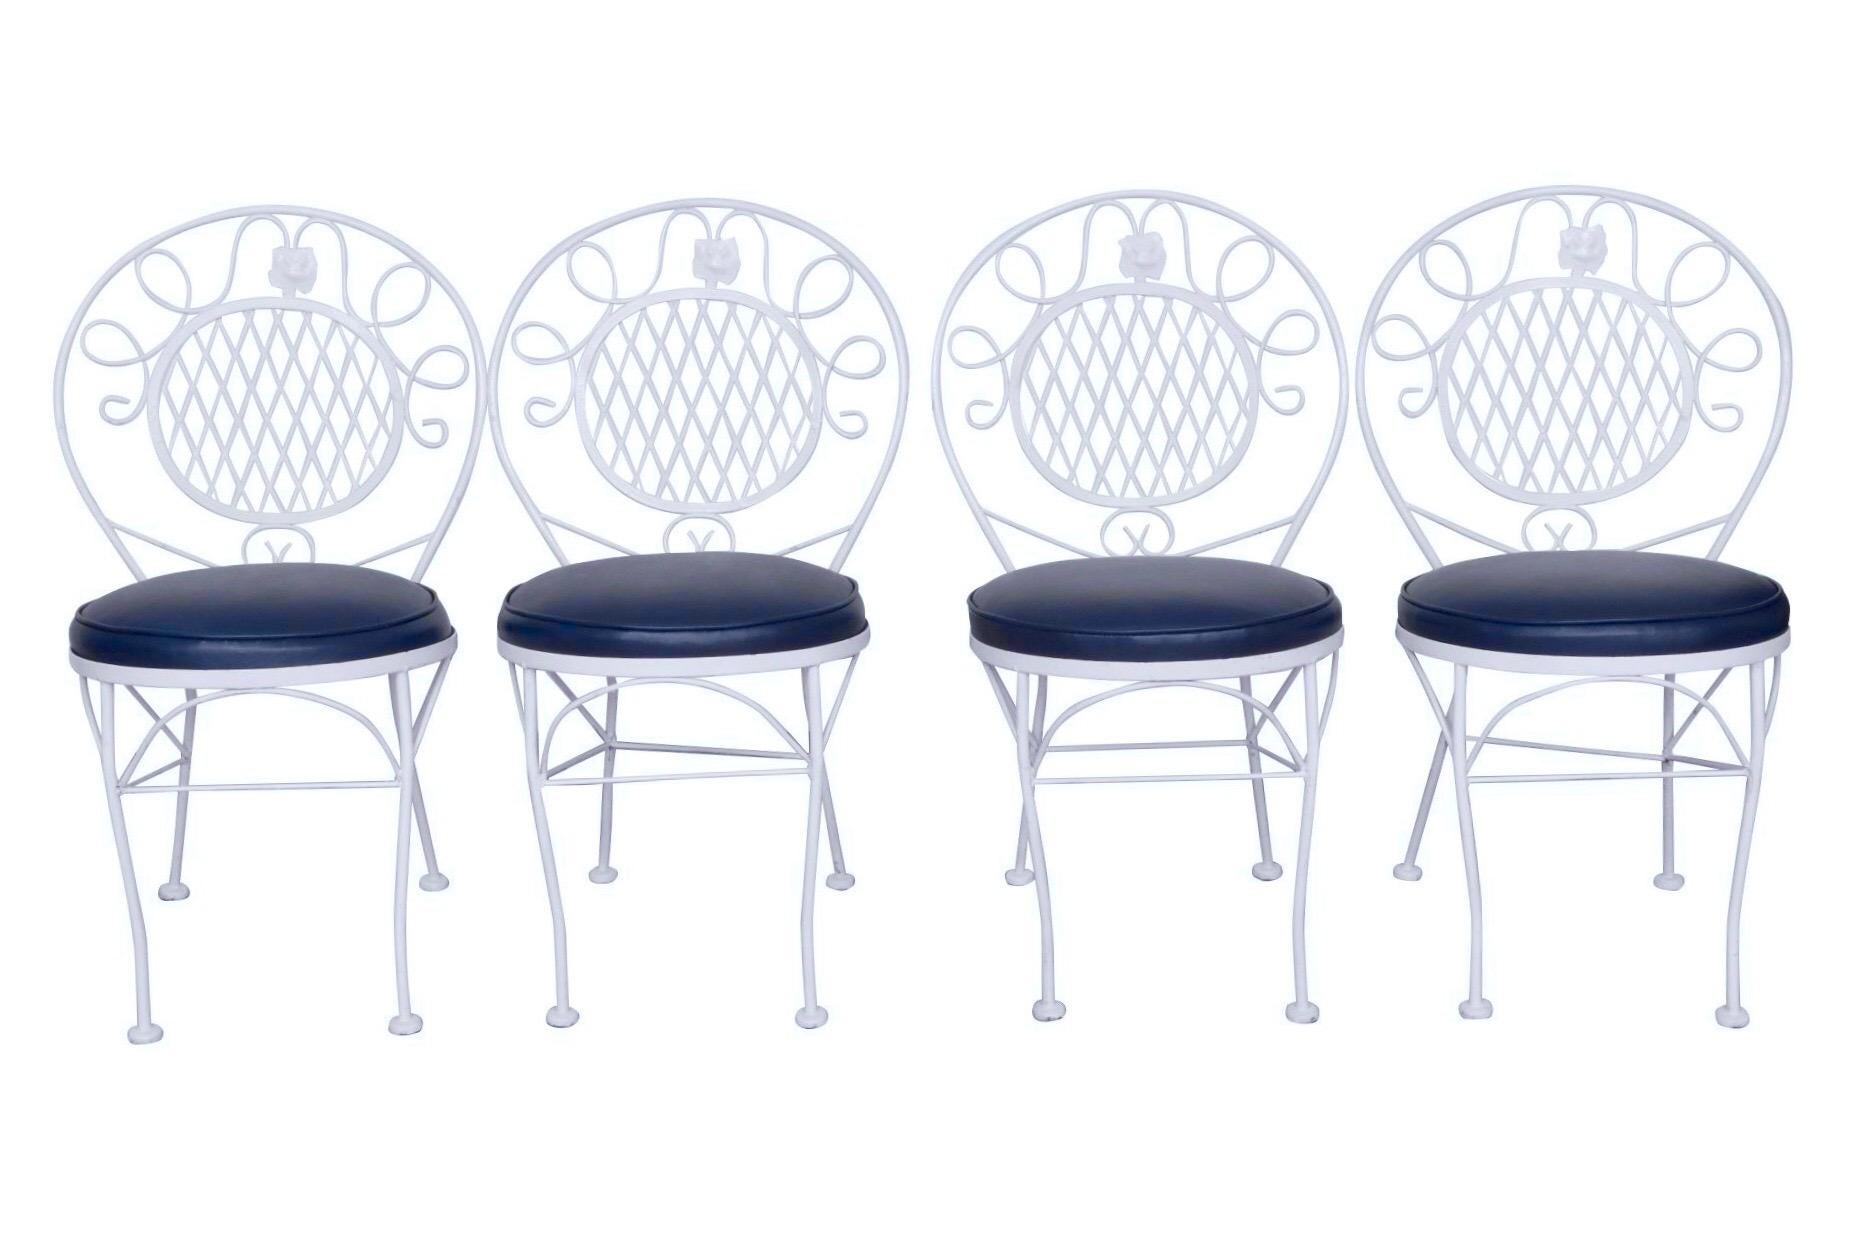 A traditional wrought metal five piece patio dining set in white. The round table is topped with textured glass, set above a scrolled apron finished with floral details. Curved legs are supported with an arched x-stretcher. Four chairs with round